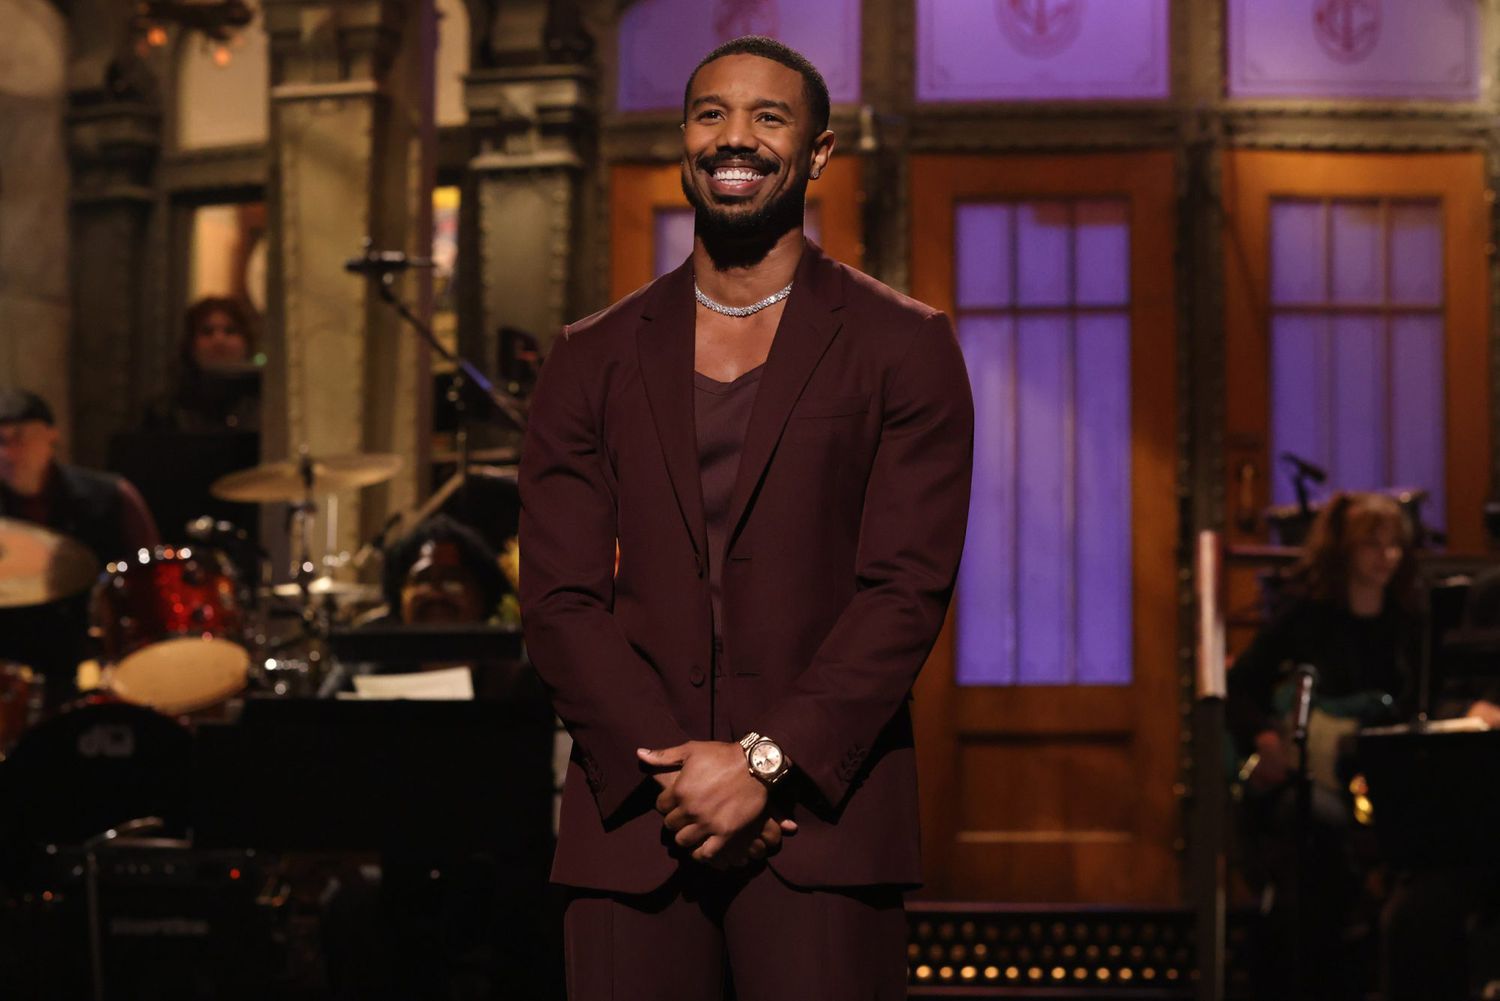 SATURDAY NIGHT LIVE -- Michael B. Jordan, Lil Baby Episode 1837 -- Pictured: Host Michael B. Jordan during the Monologue on Saturday, January 28, 2023 -- (Photo by: Rosalind OConnor/NBC via Getty Images)